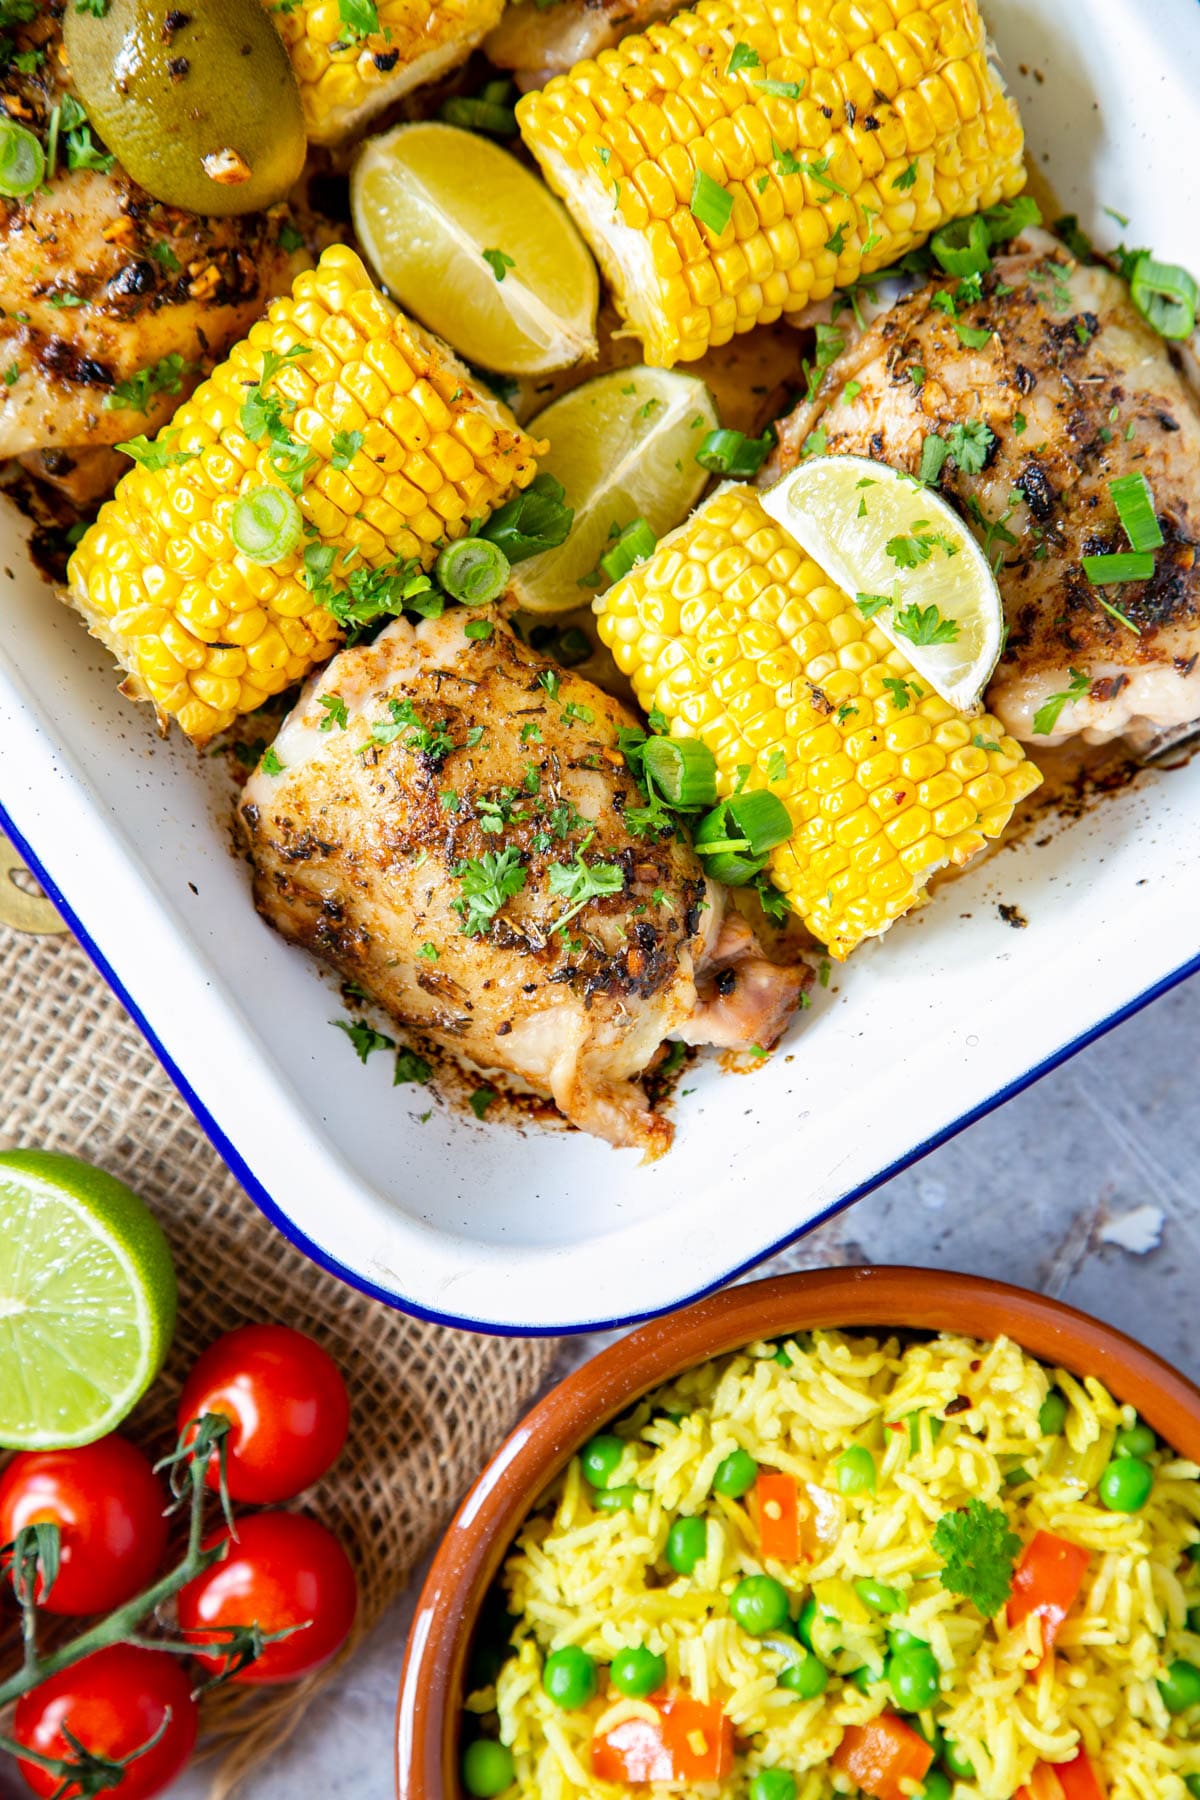 A close up of a roasting dish of cooked chicken thighs and corn on the cob. At the bottom of the frame is a dish of fragrant rice and peas.